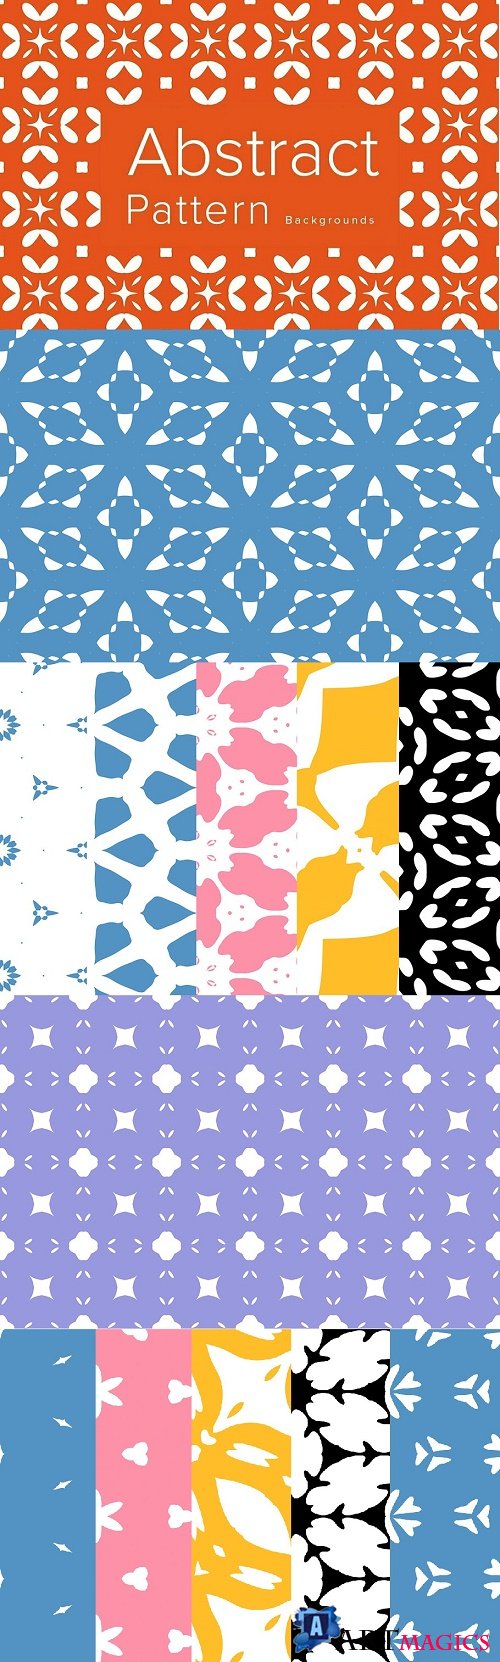 Abstract pattern backgrounds - 3855984